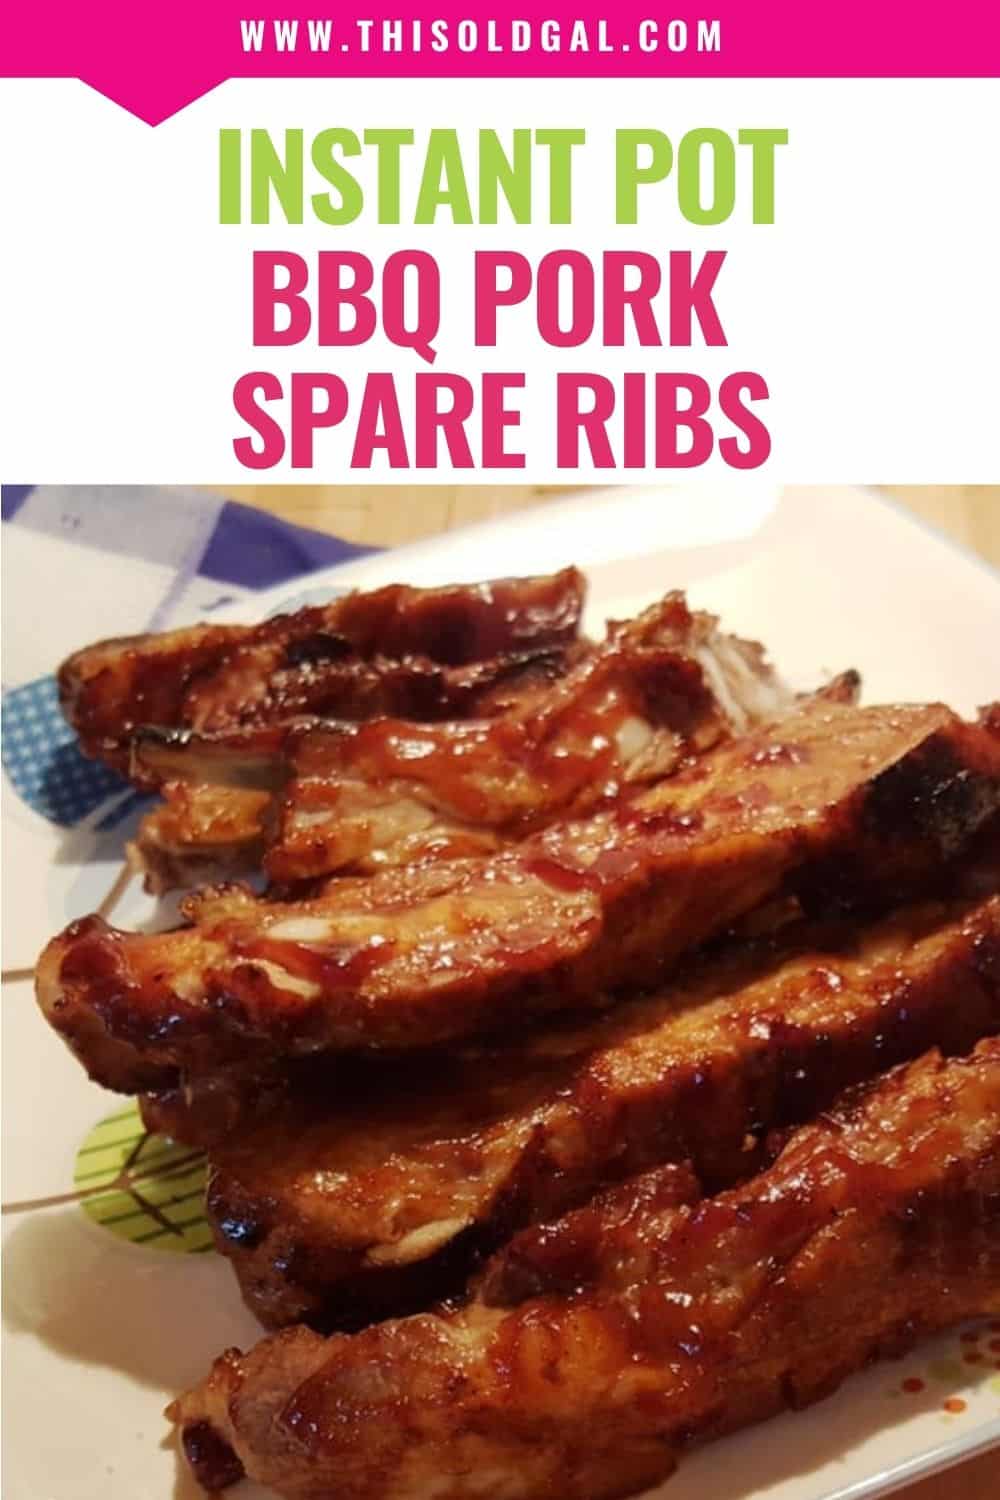 Instant Pot BBQ Pork Spare Ribs [Baby BackSt. Louis]